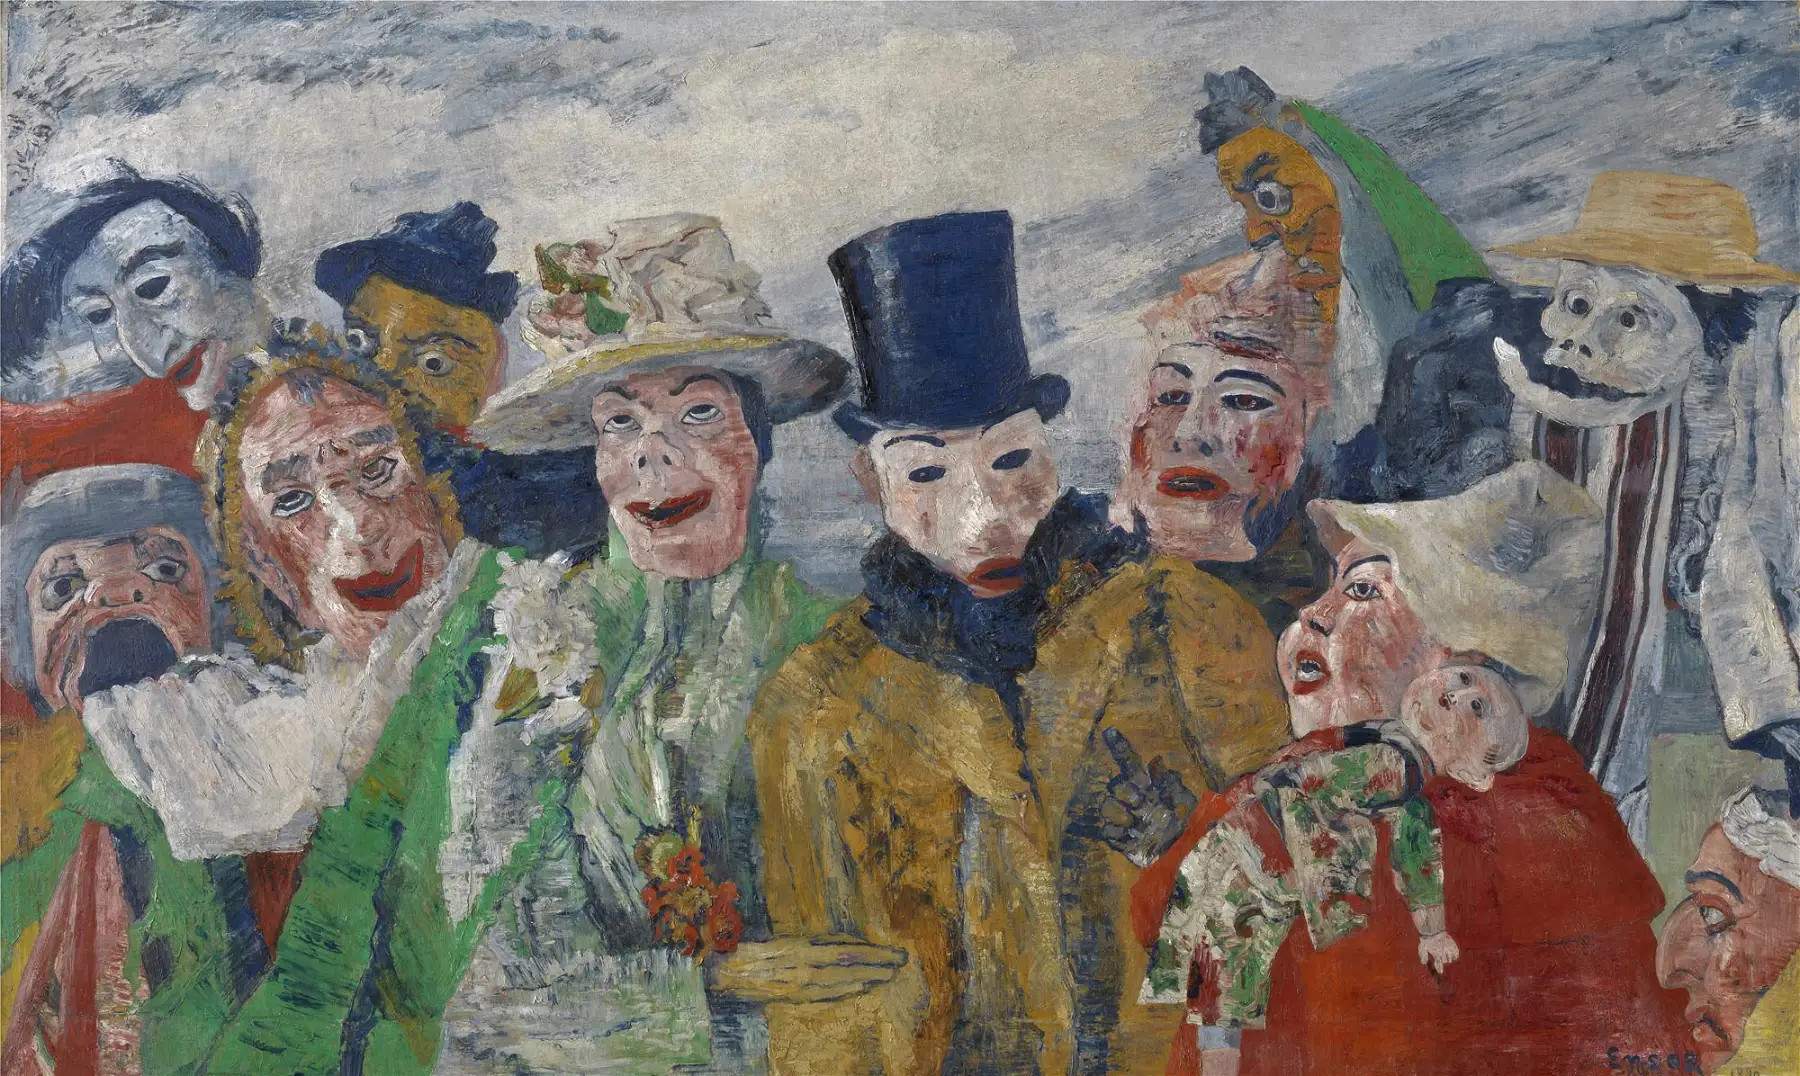 Ostend and Antwerp celebrate James Ensor on the 75th anniversary of his death